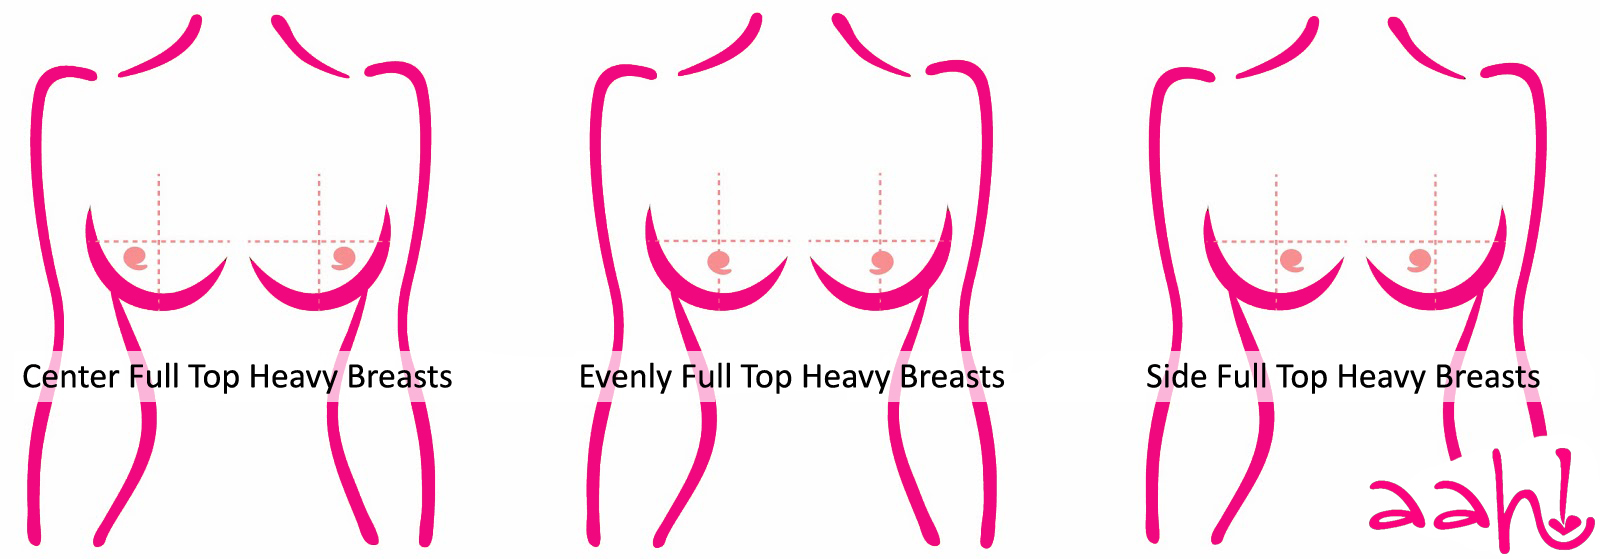 How to tell if you have Top-Heavy Breasts